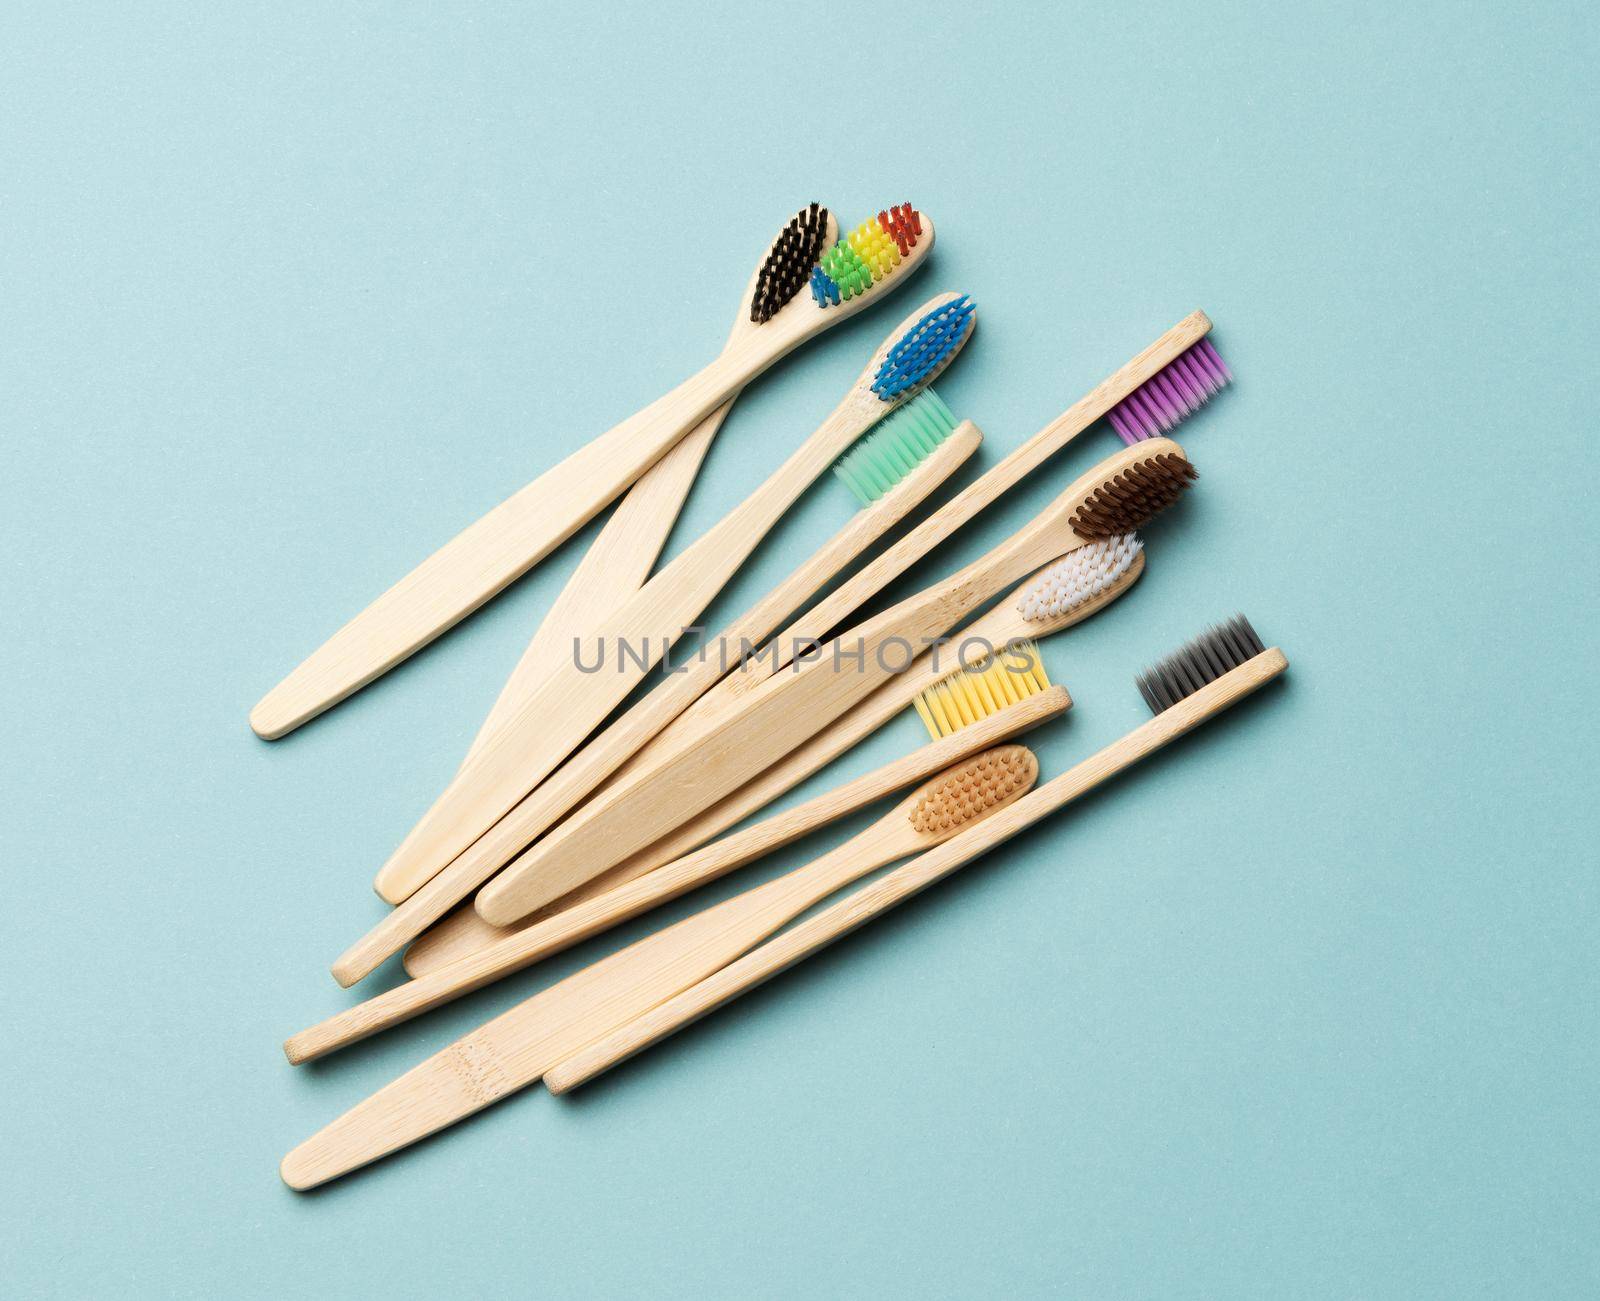 multicolored wooden toothbrushes on a blue background, plastic rejection concept by ndanko